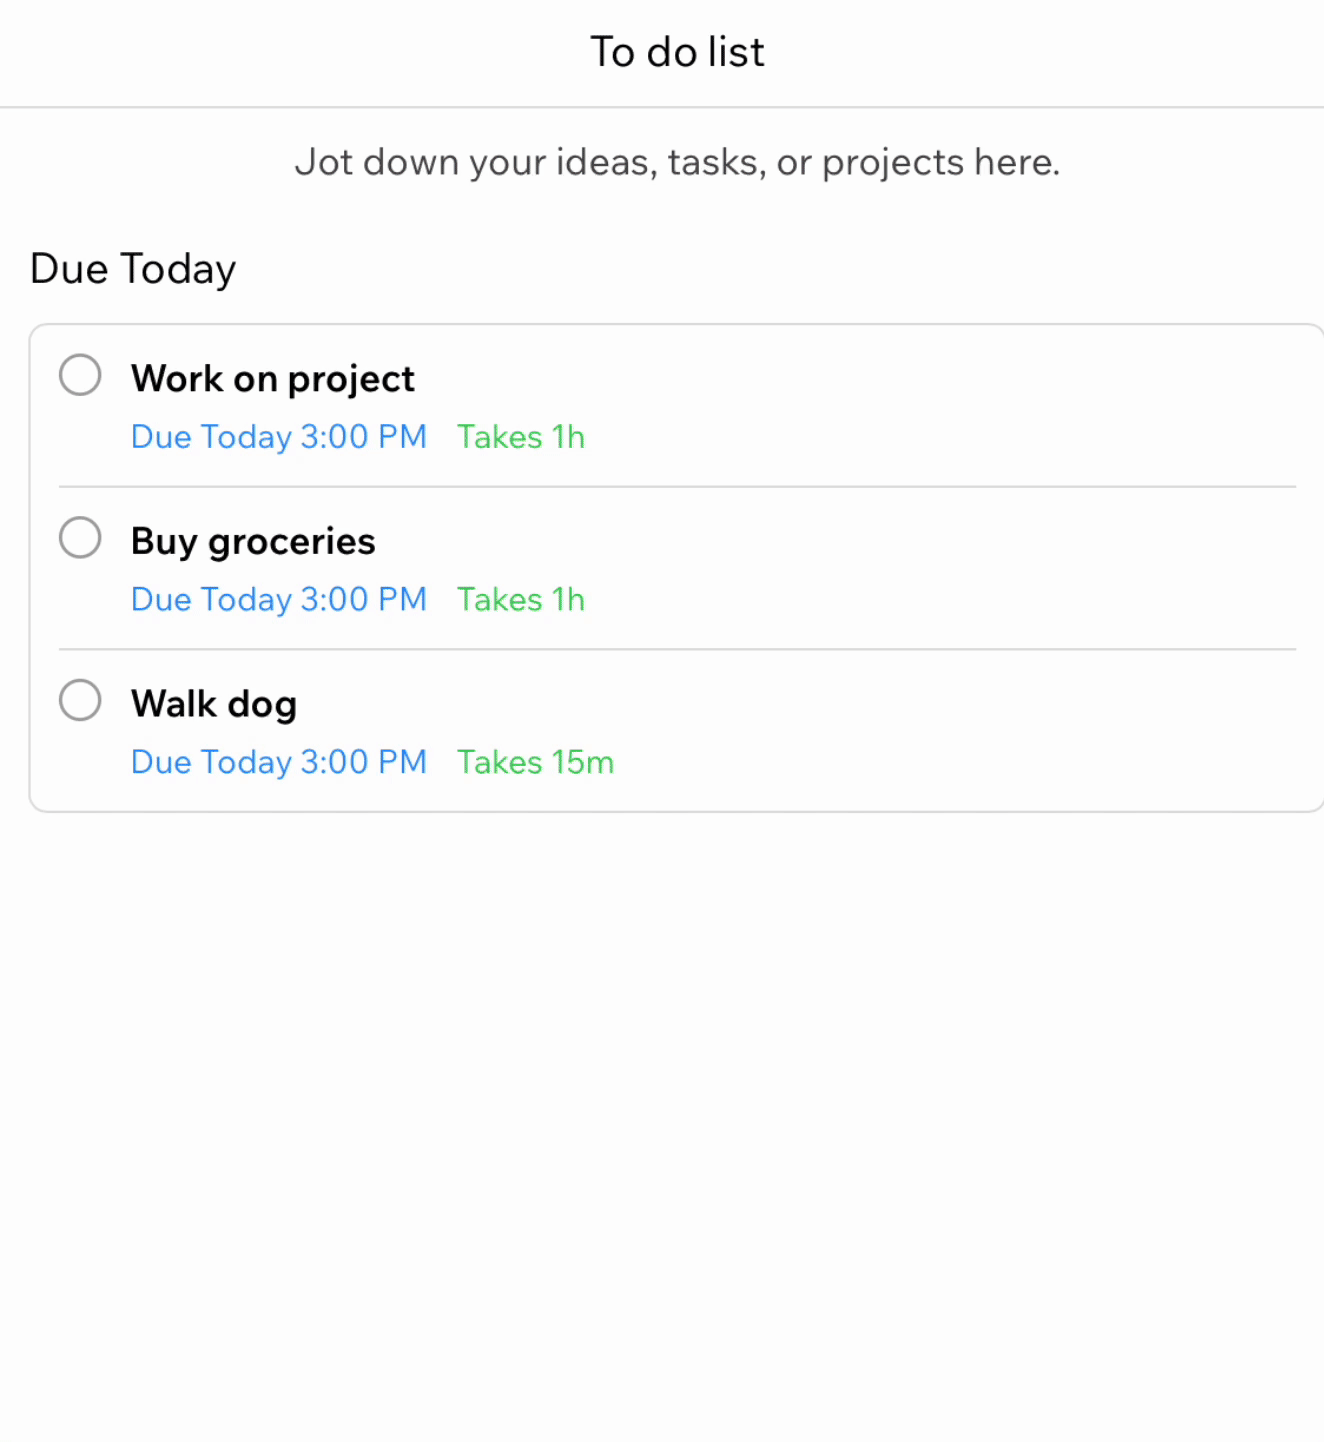 Tasks are planned on your calendar automatically